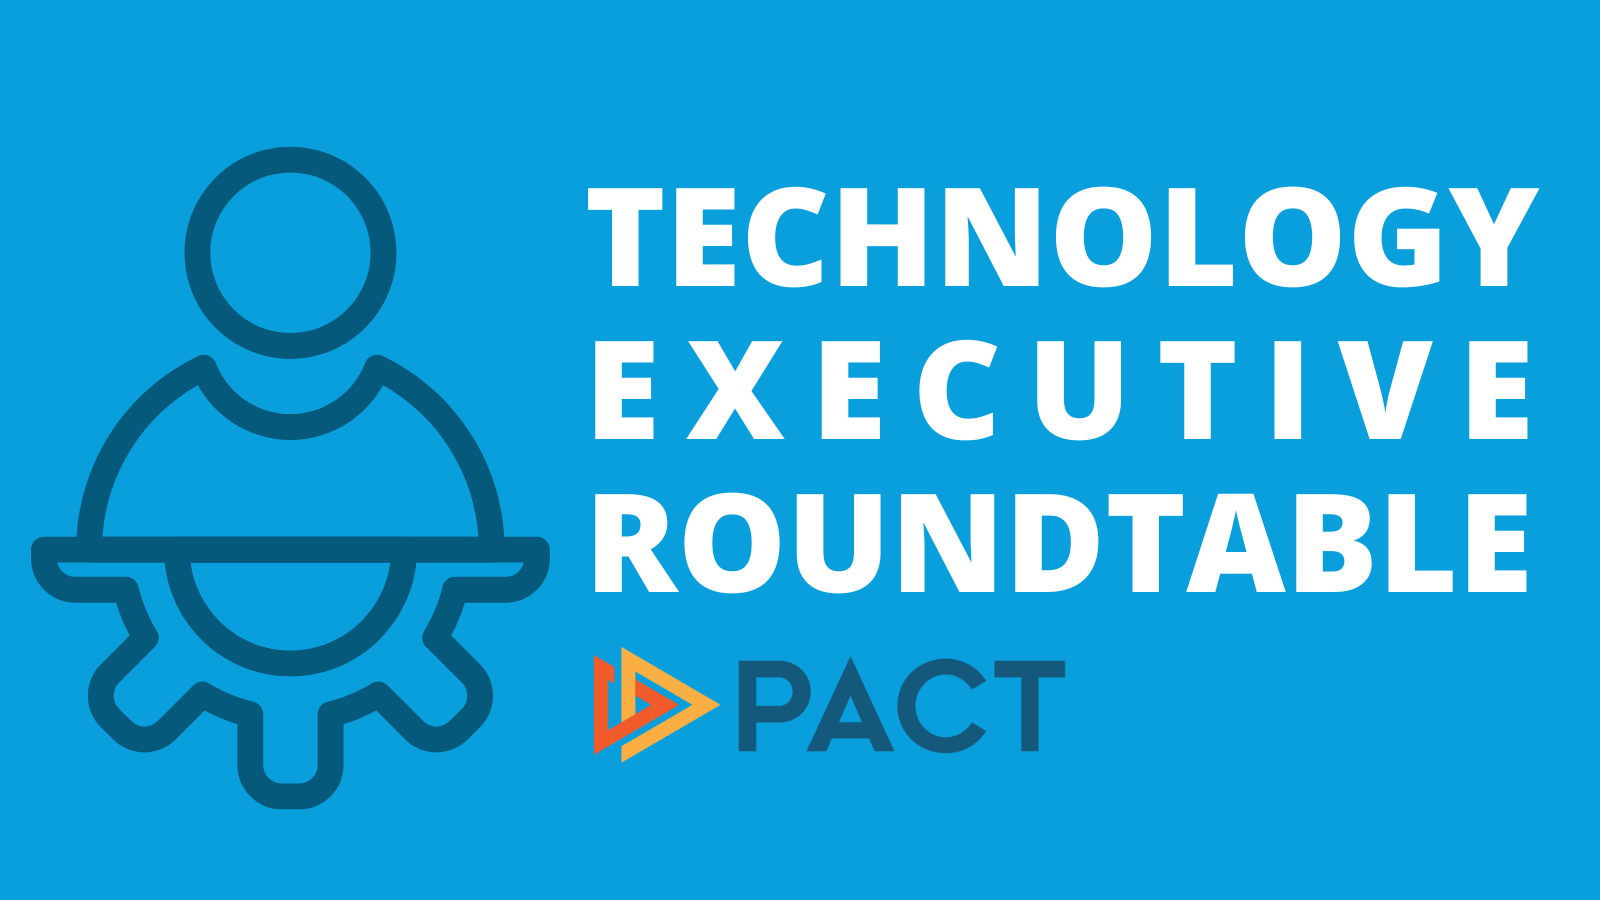 Shares the logo of the Technology Enterprise Roundtable